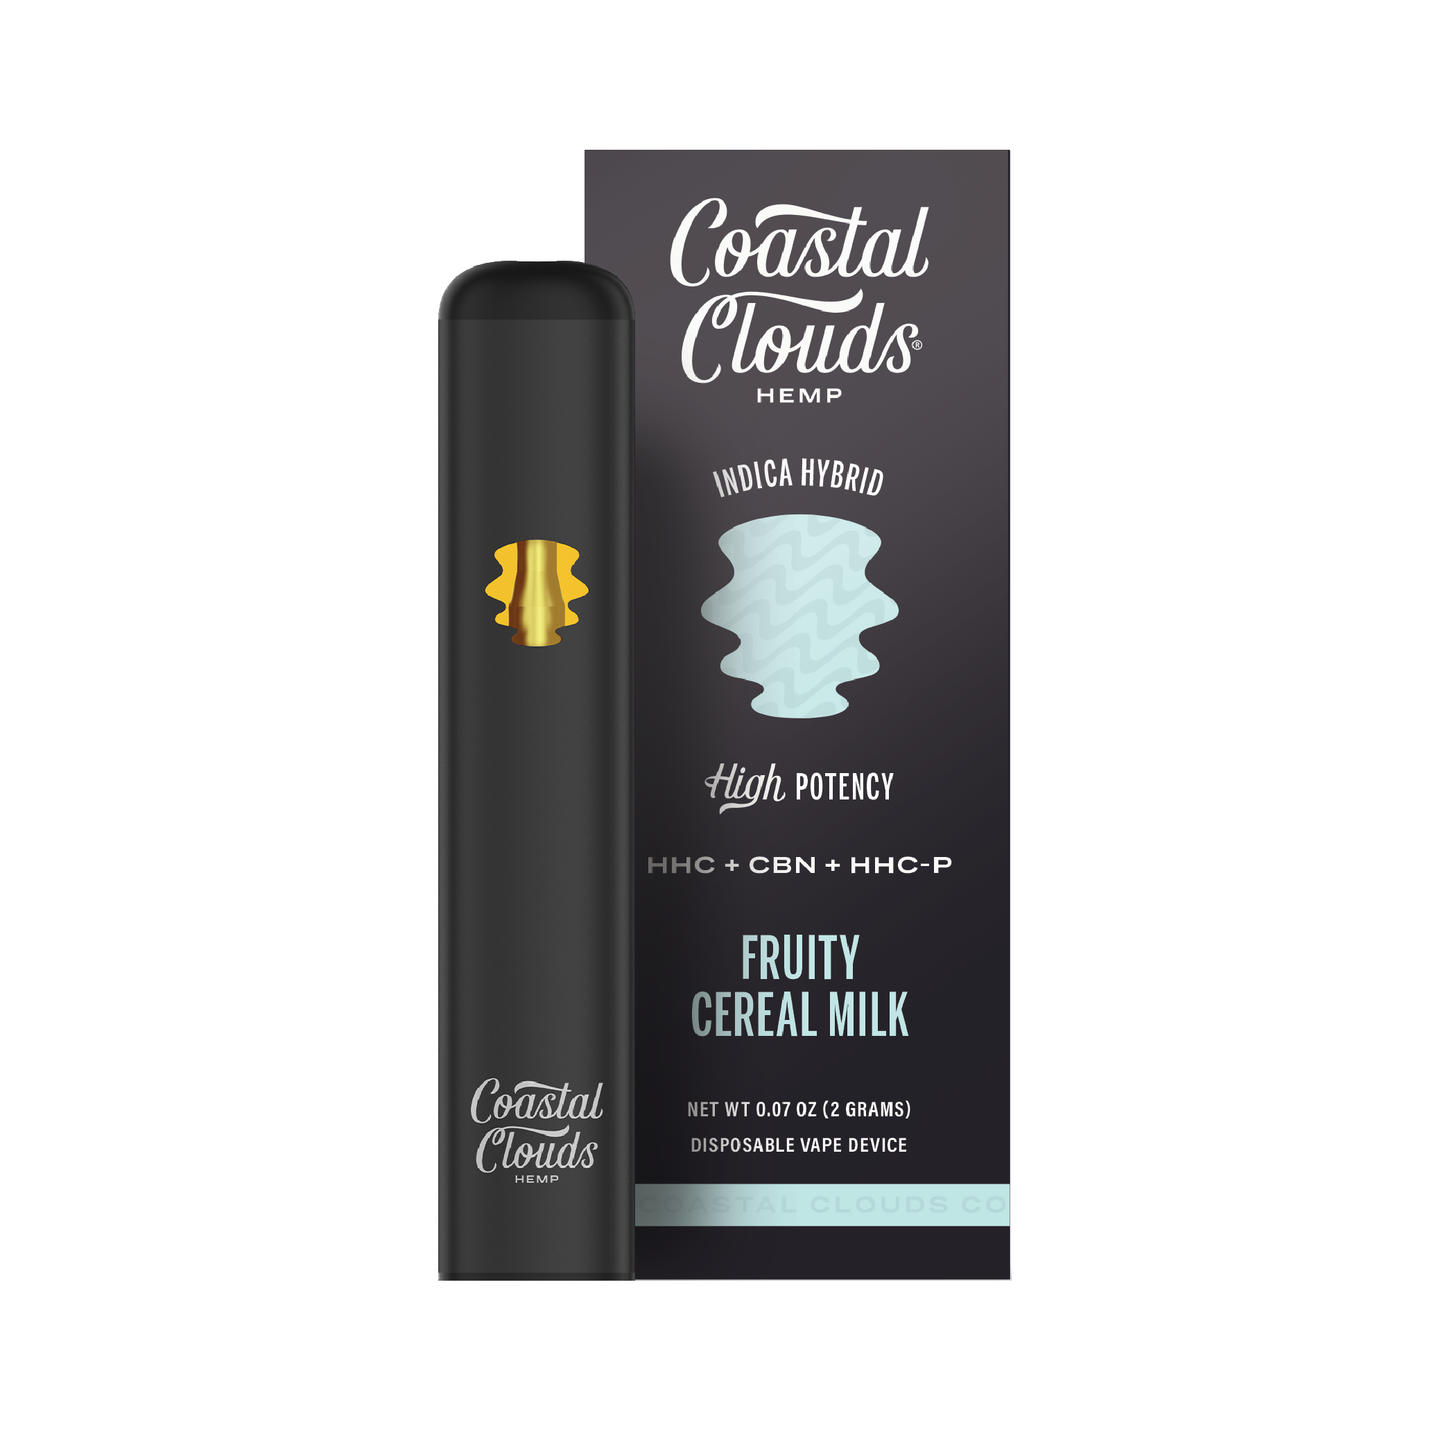 Fruity Cereal Milk HHC + CBN + HHC-P 2g Disposable by Coastal Clouds Hemp